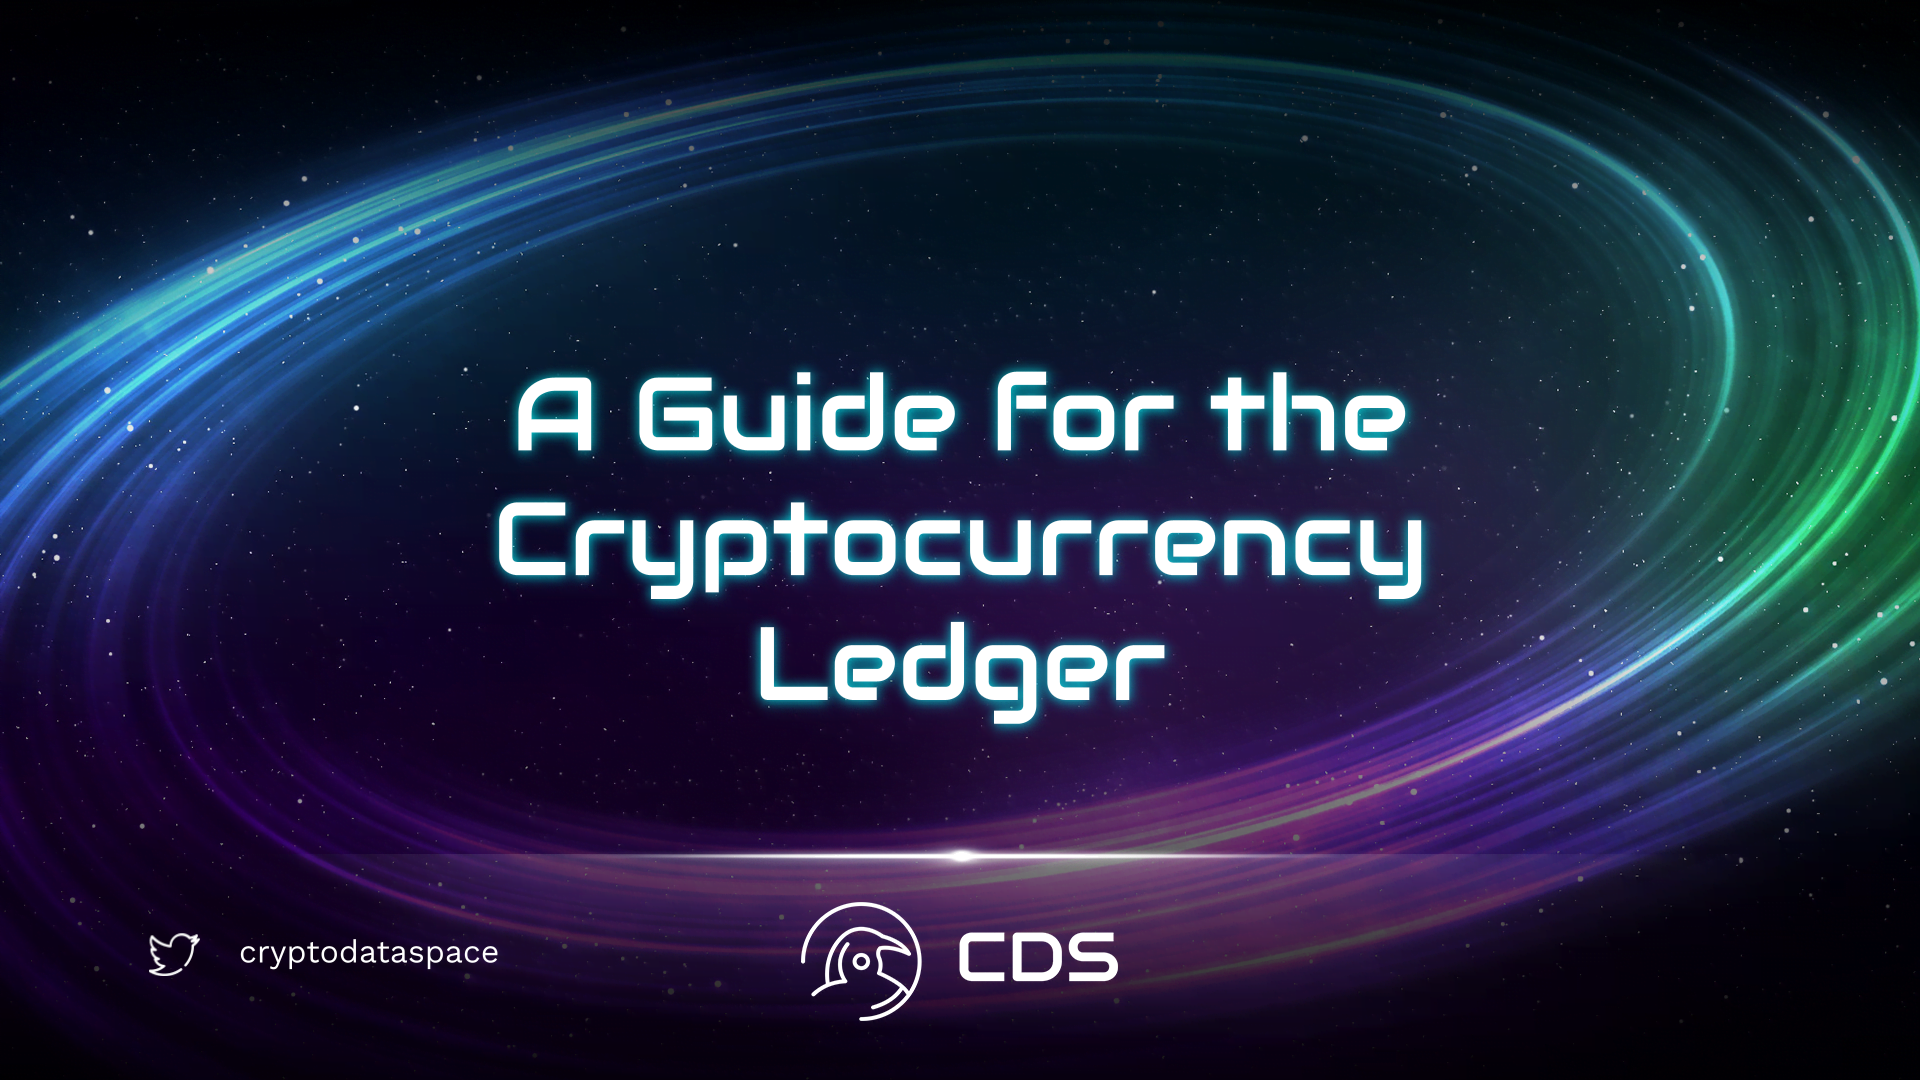 A Guide for the Cryptocurrency Ledger